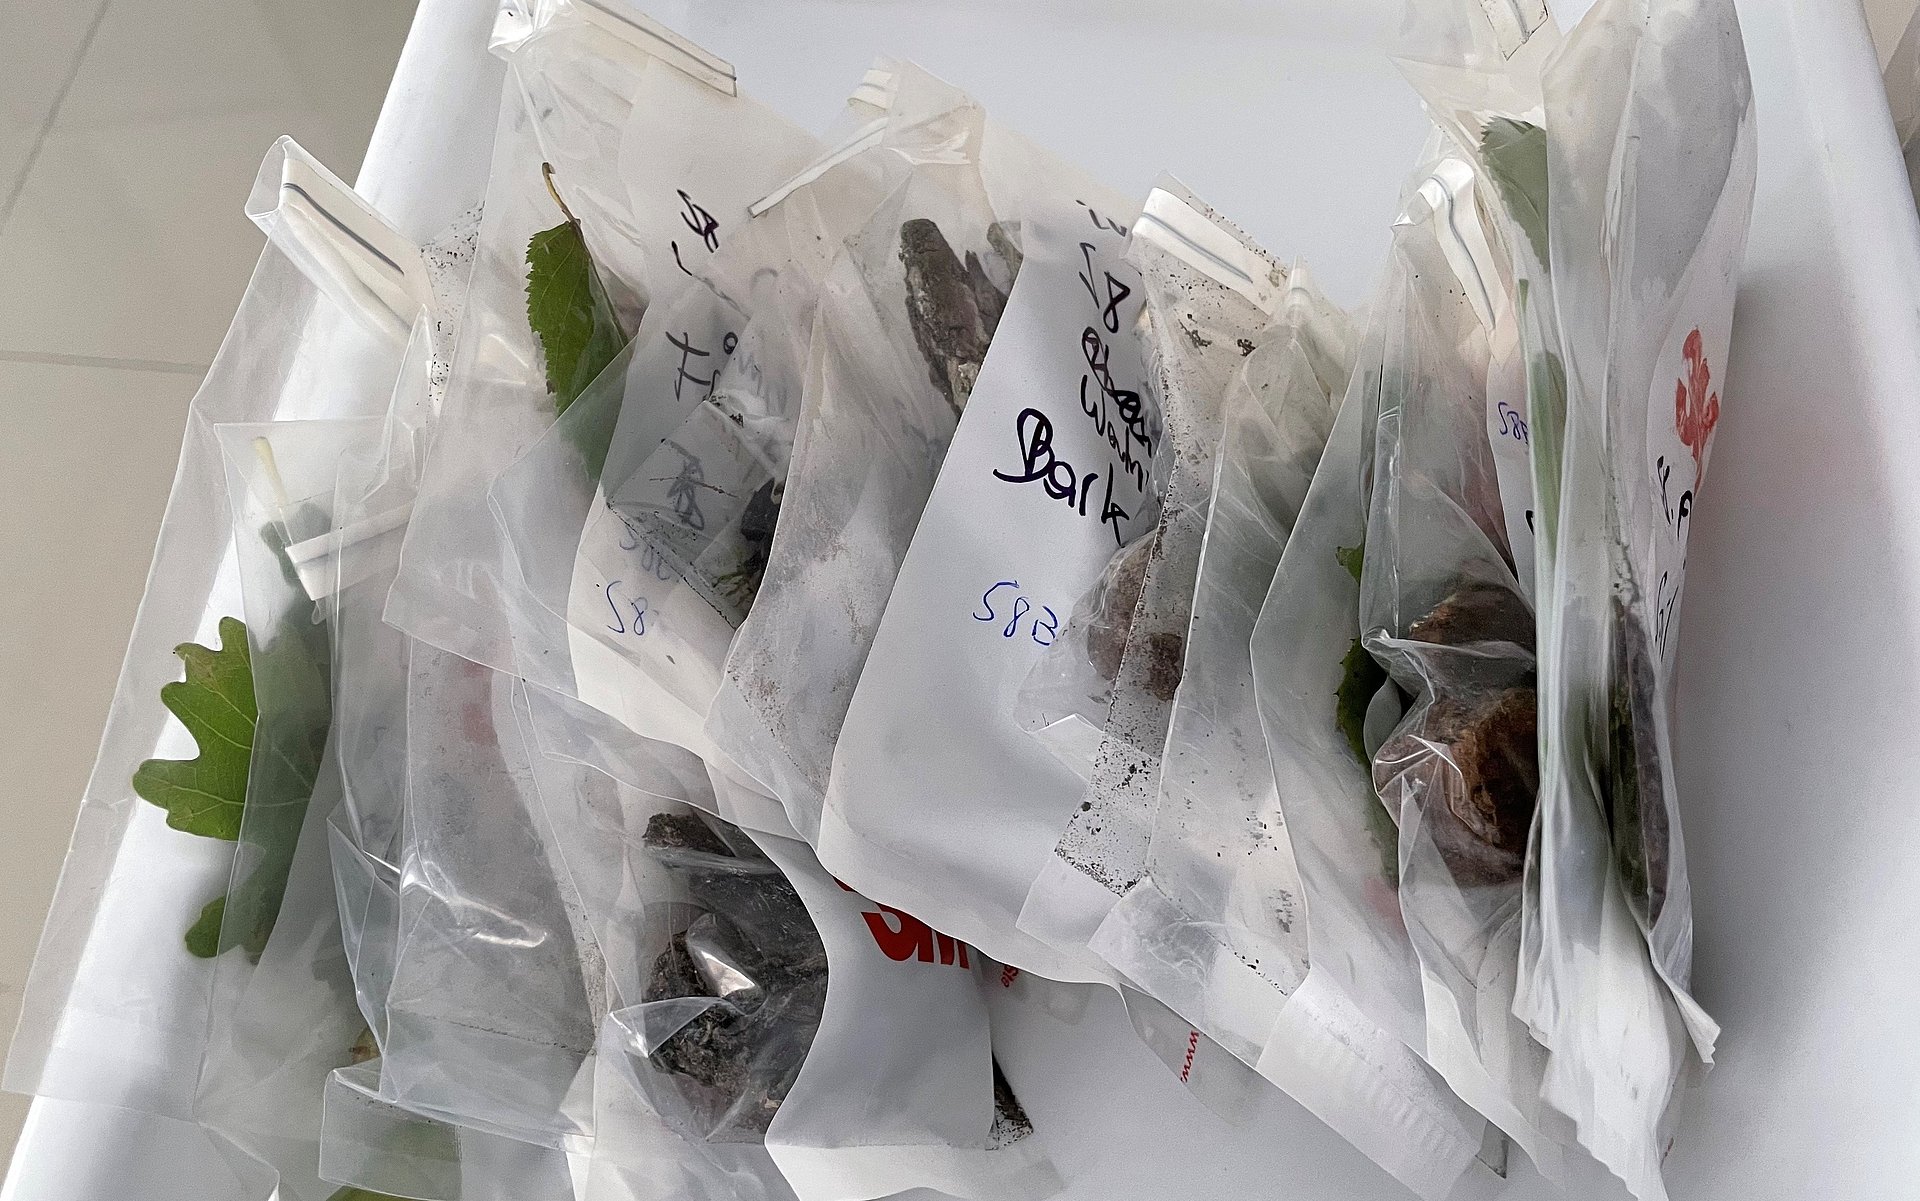 Collected substrate samples about soil, bark, leaves, fruits and fungi in small plastic bags.